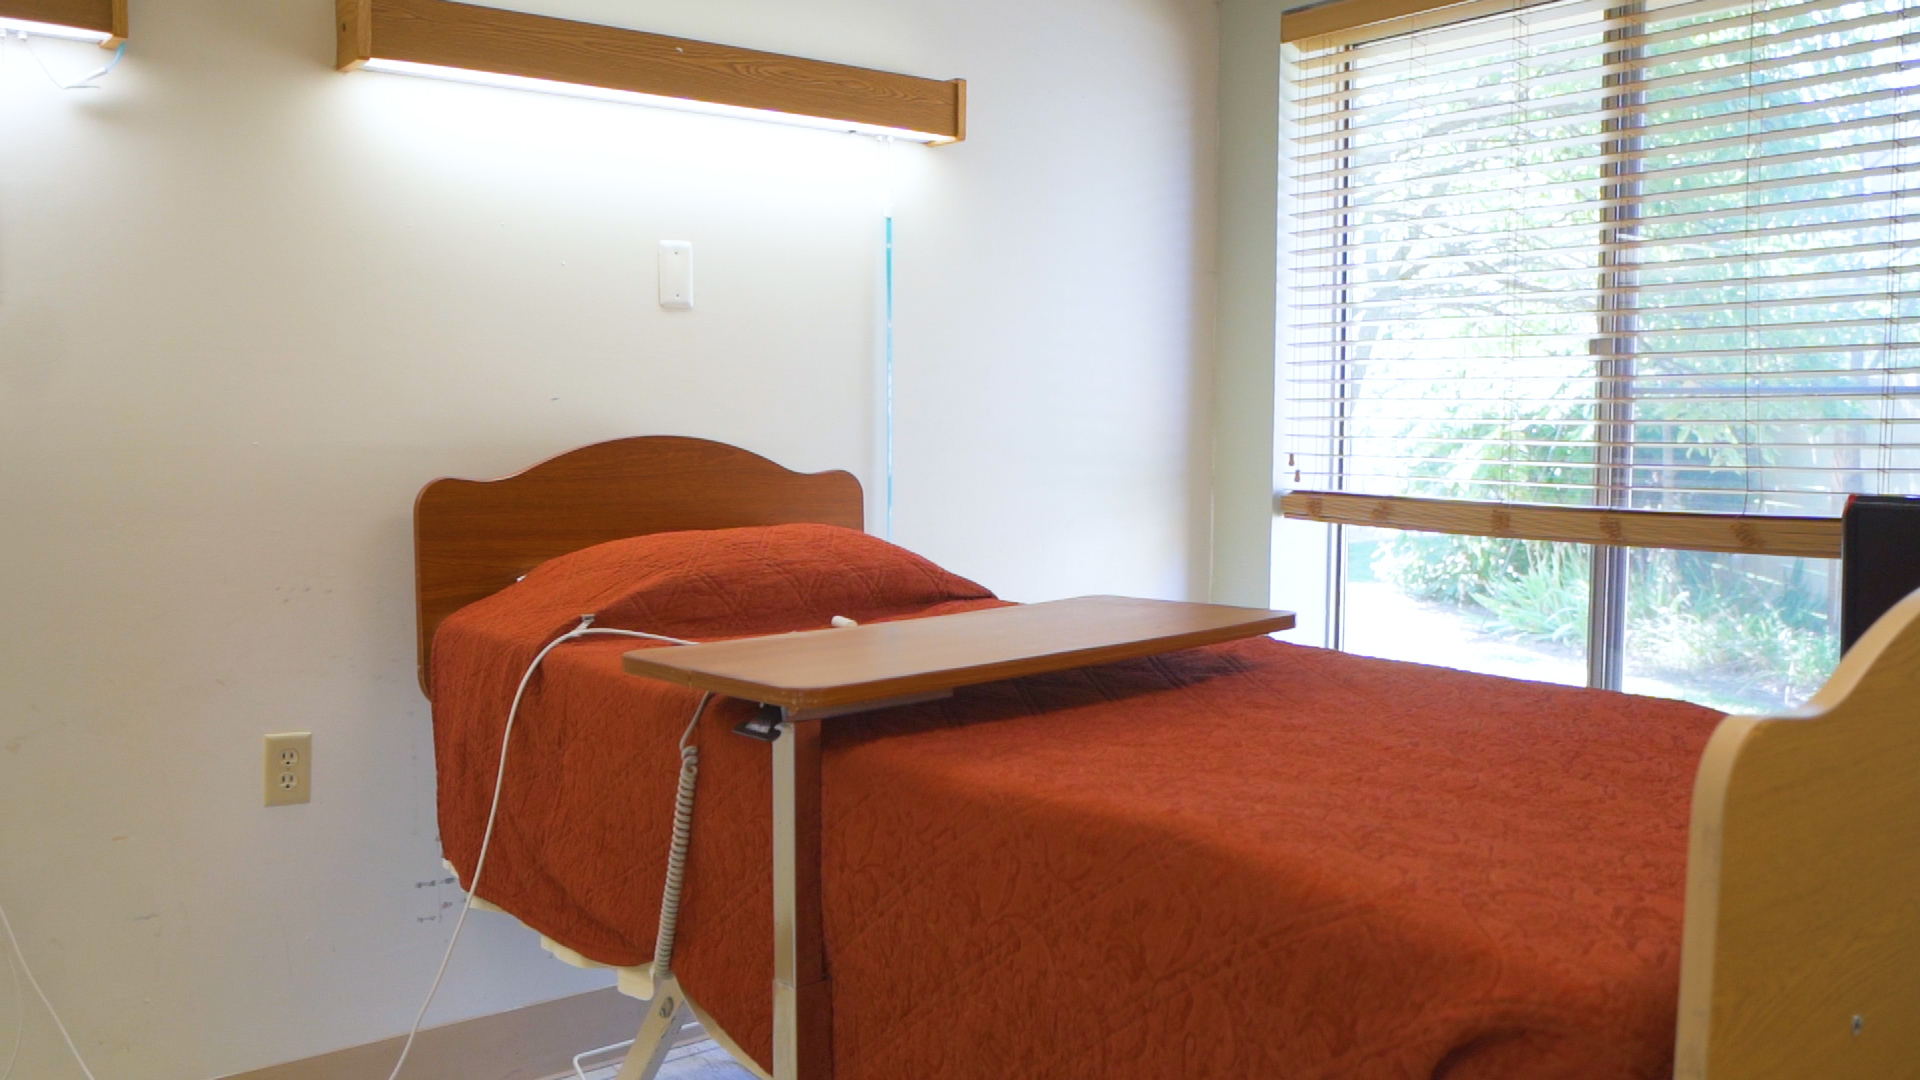 Room with one bed and orange blanket with bed table. One window on the background.